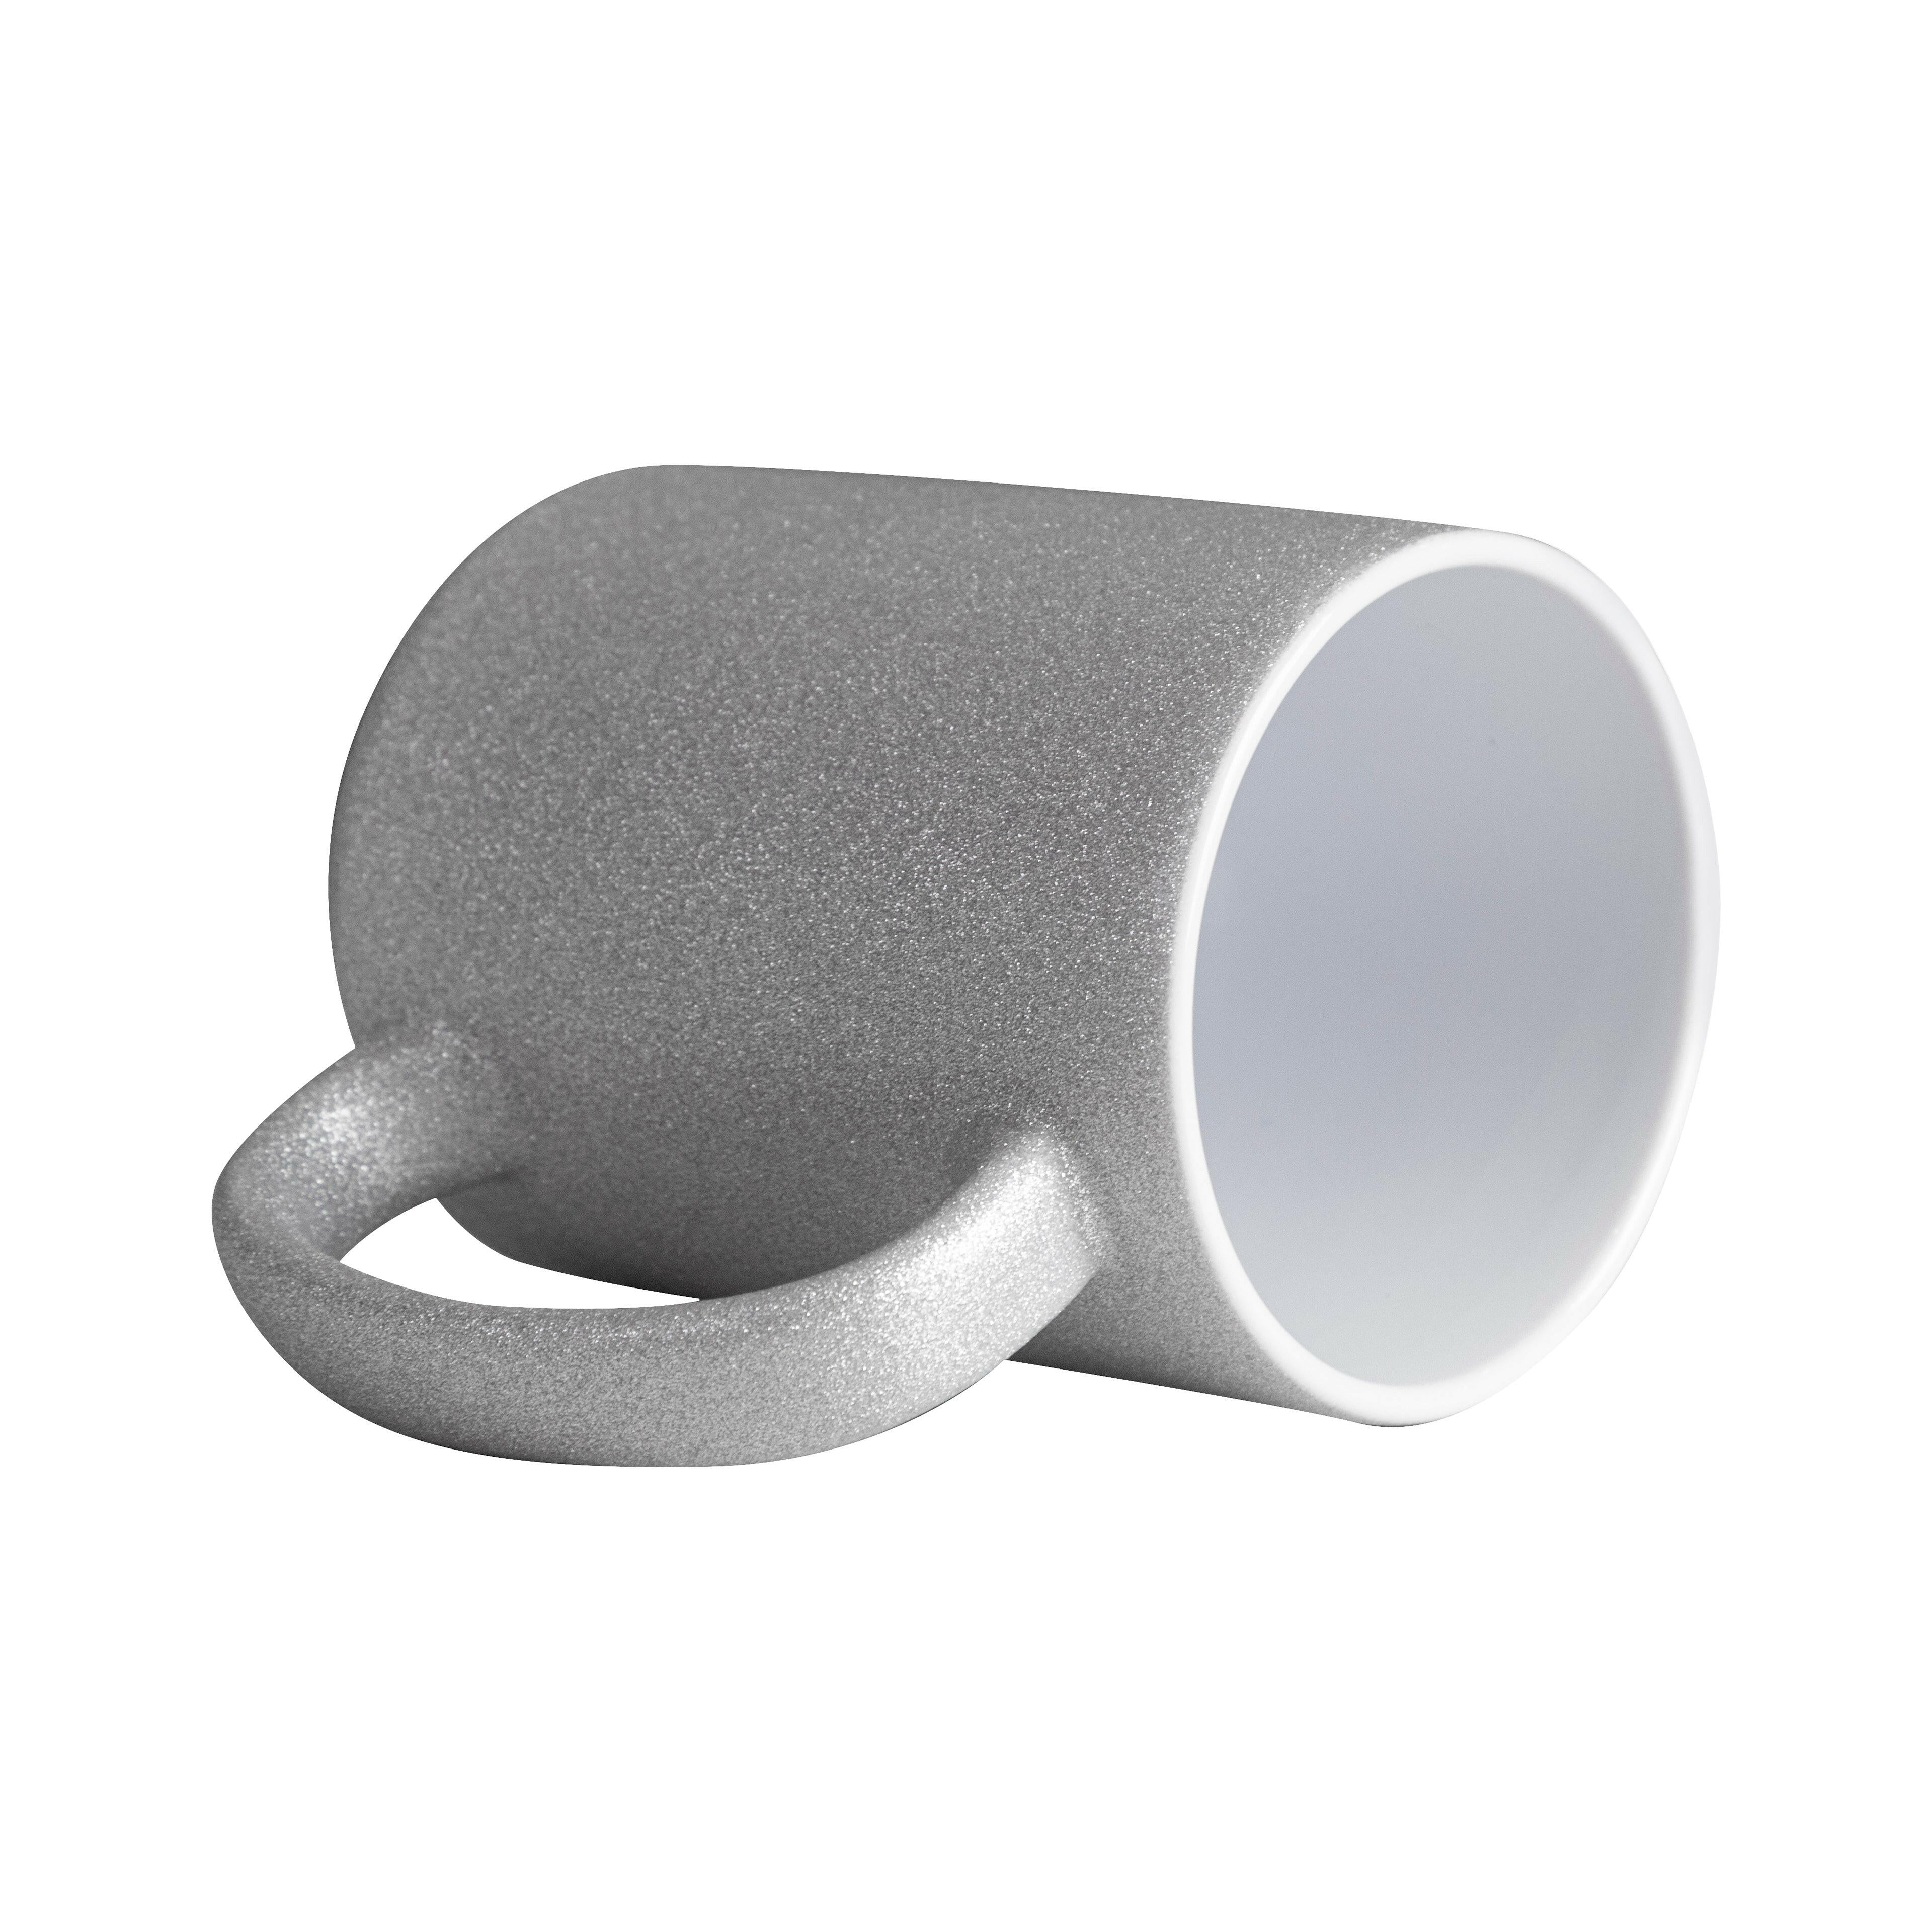 15oz Silver Glitter Sublimation Mugs - 6 Pack.